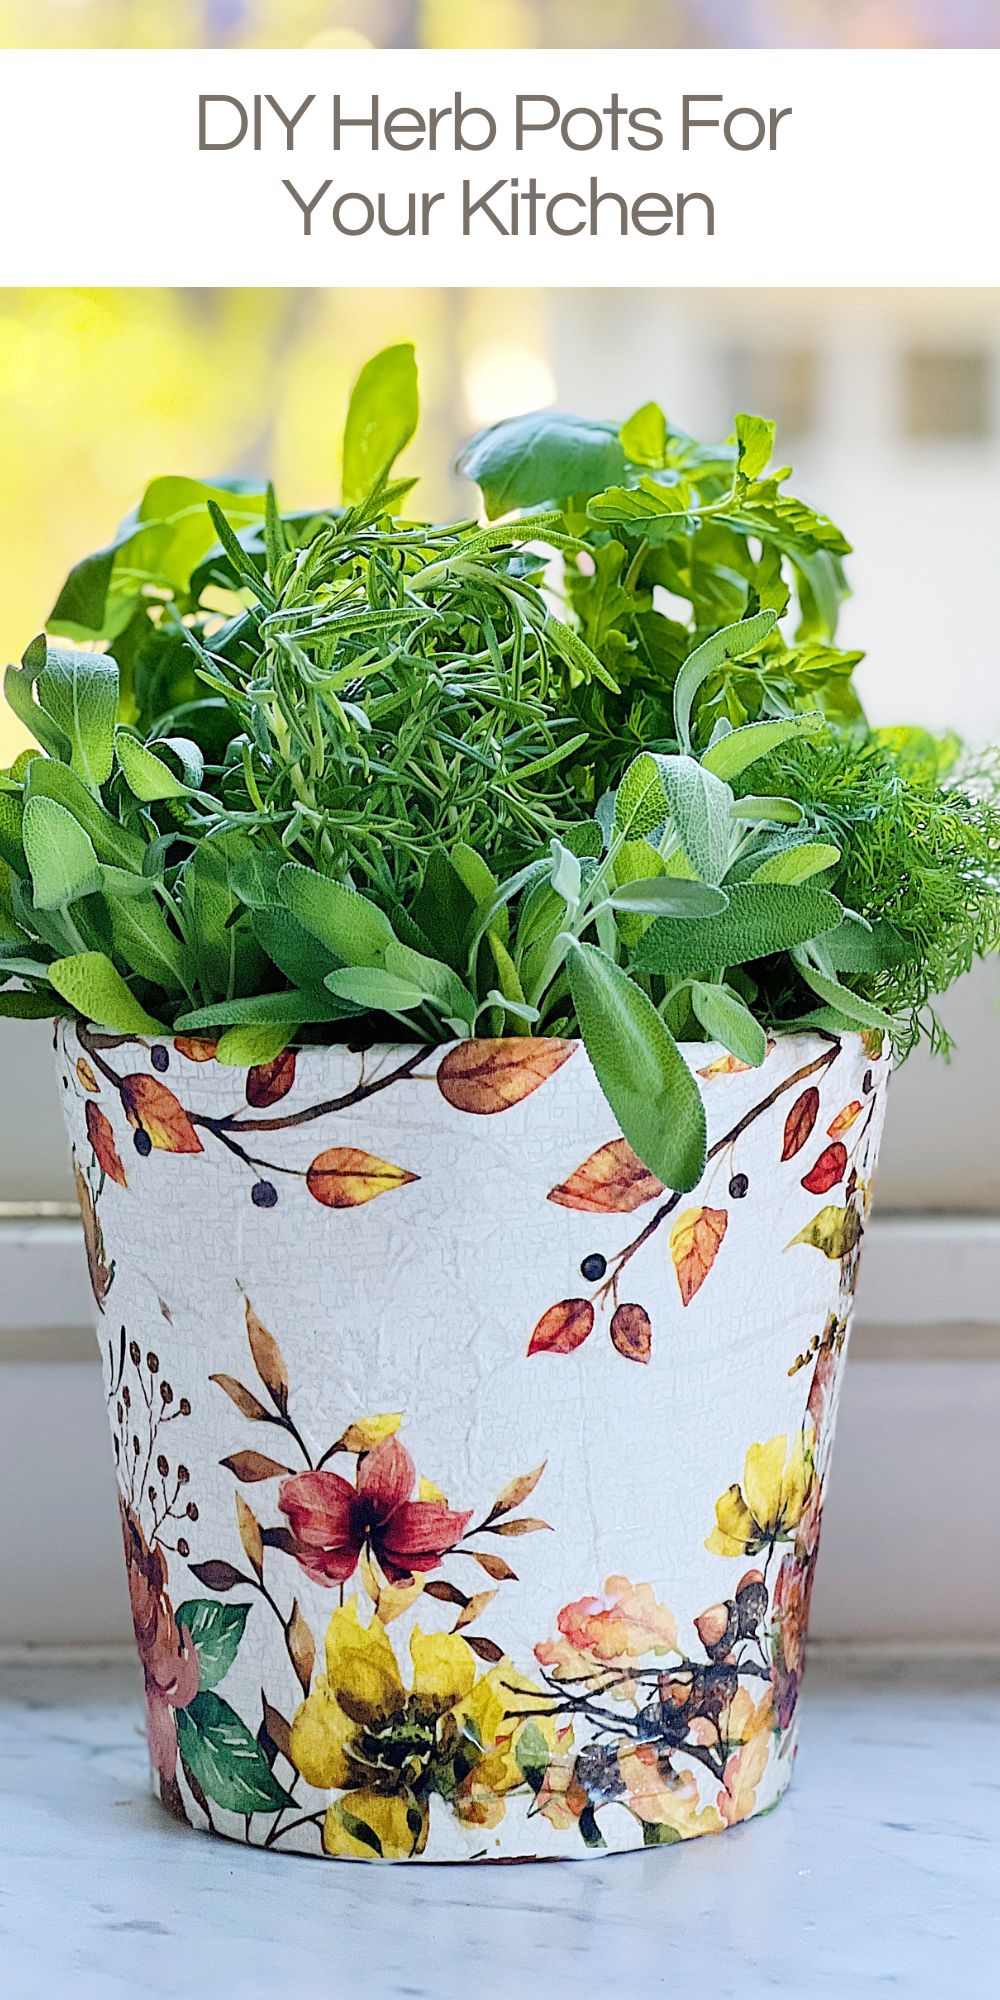 Summer gardening doesn't only have to take place outdoors. Today I am sharing how to make DIY herb pots to grow fresh herbs in your kitchen!